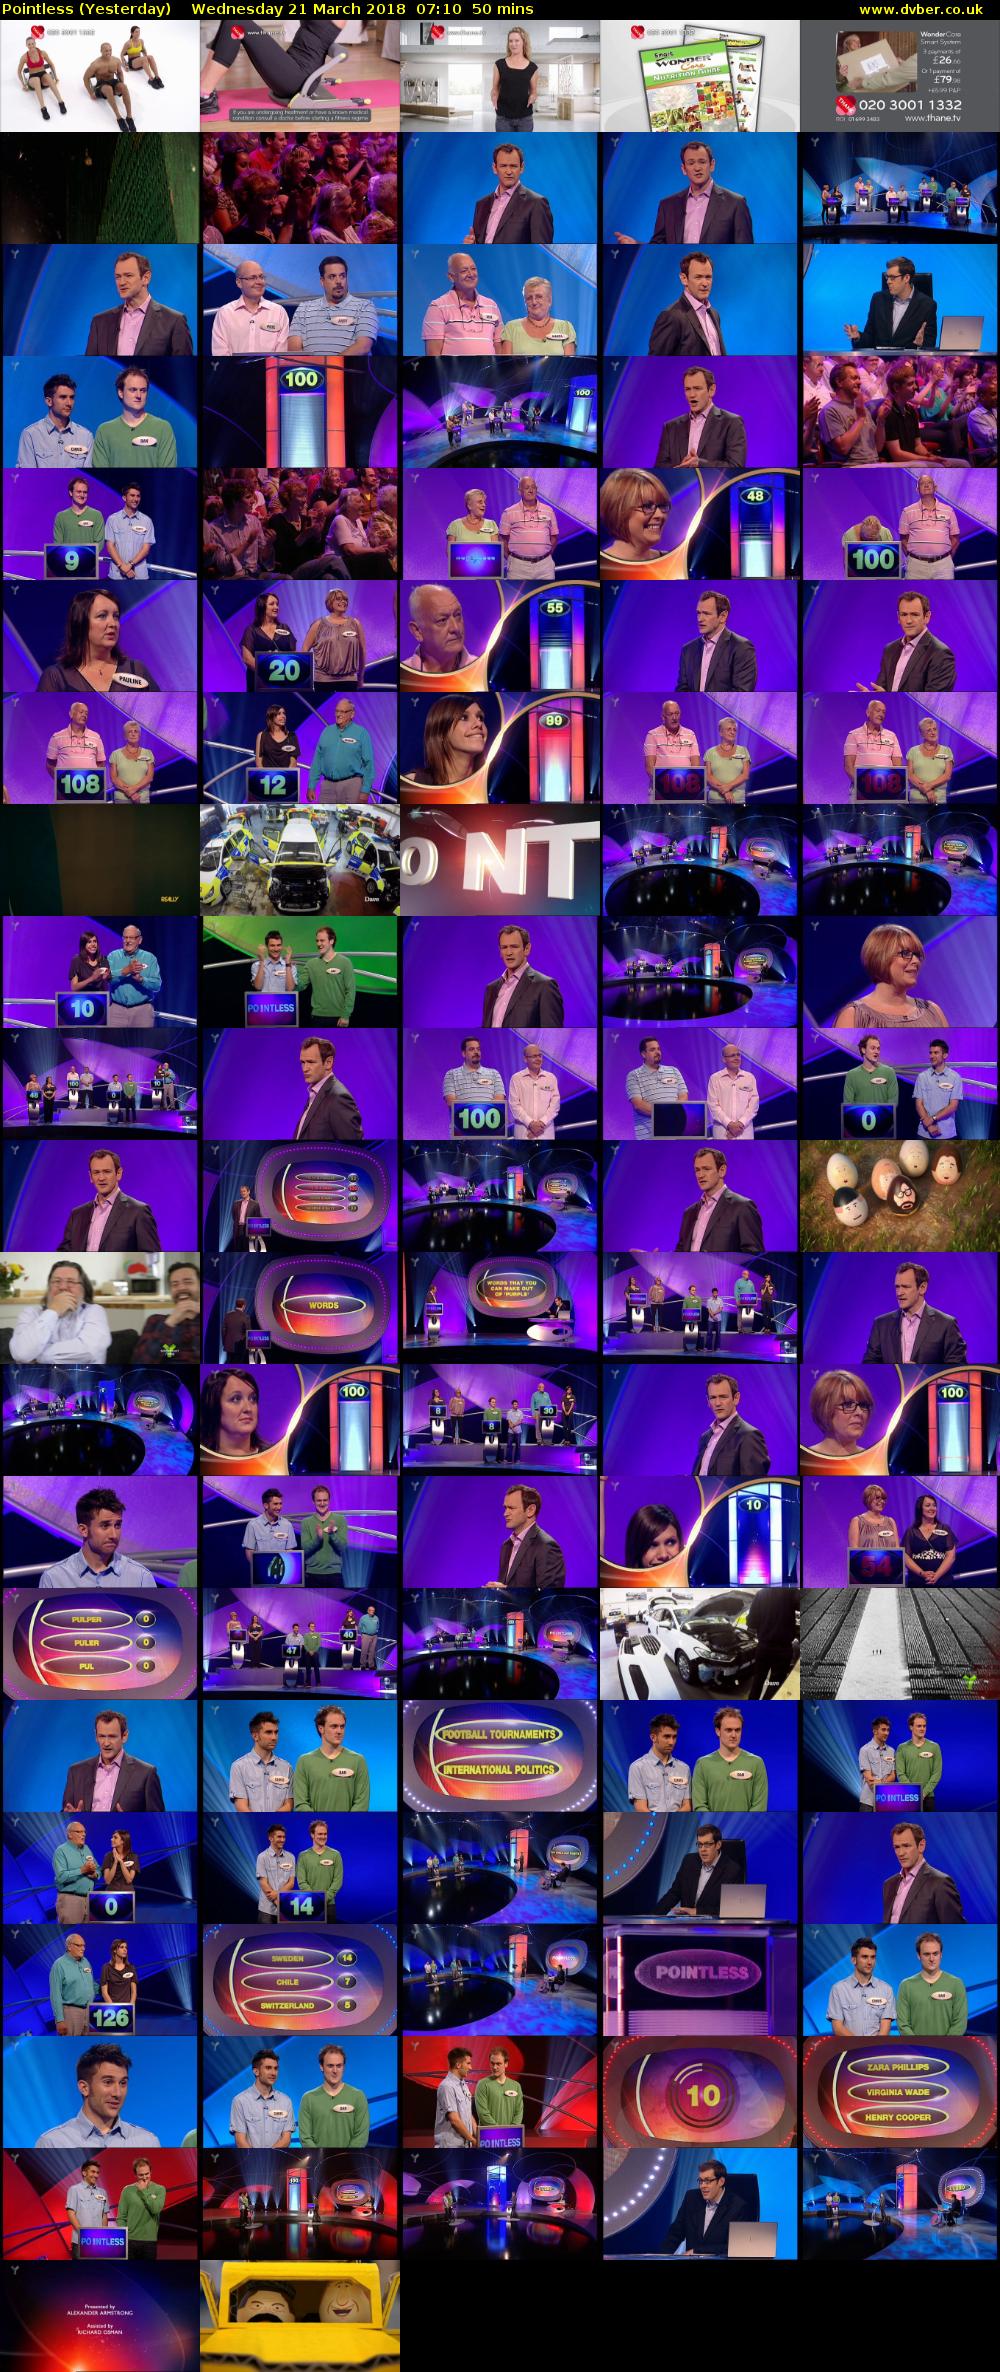 Pointless (Yesterday) Wednesday 21 March 2018 07:10 - 08:00